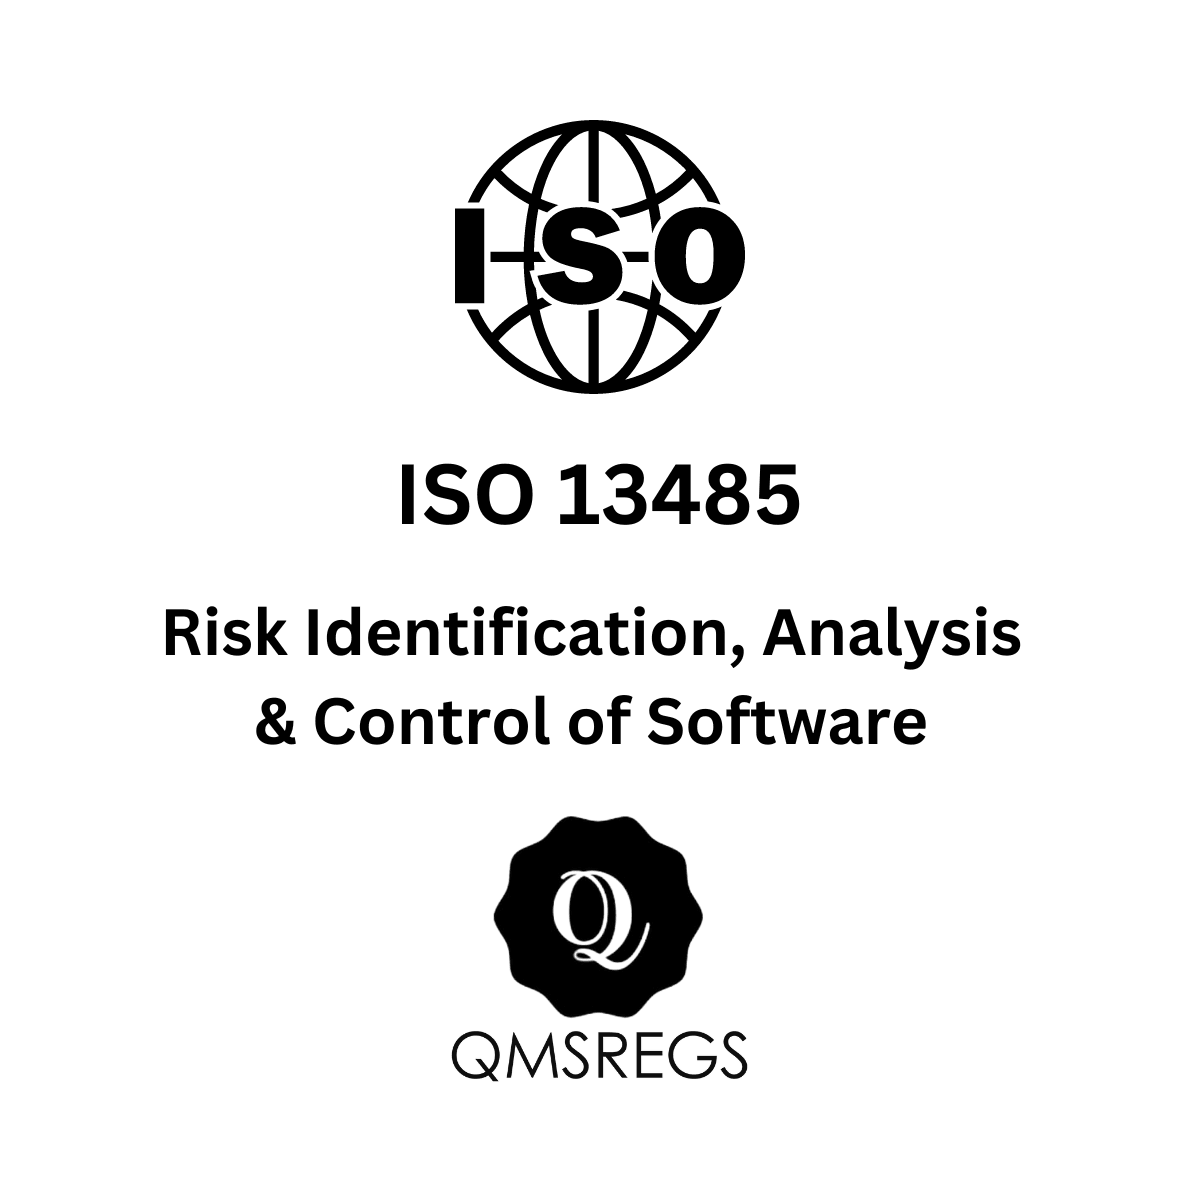 ISO 13485 Risk Identification, Analysis and Control of Software